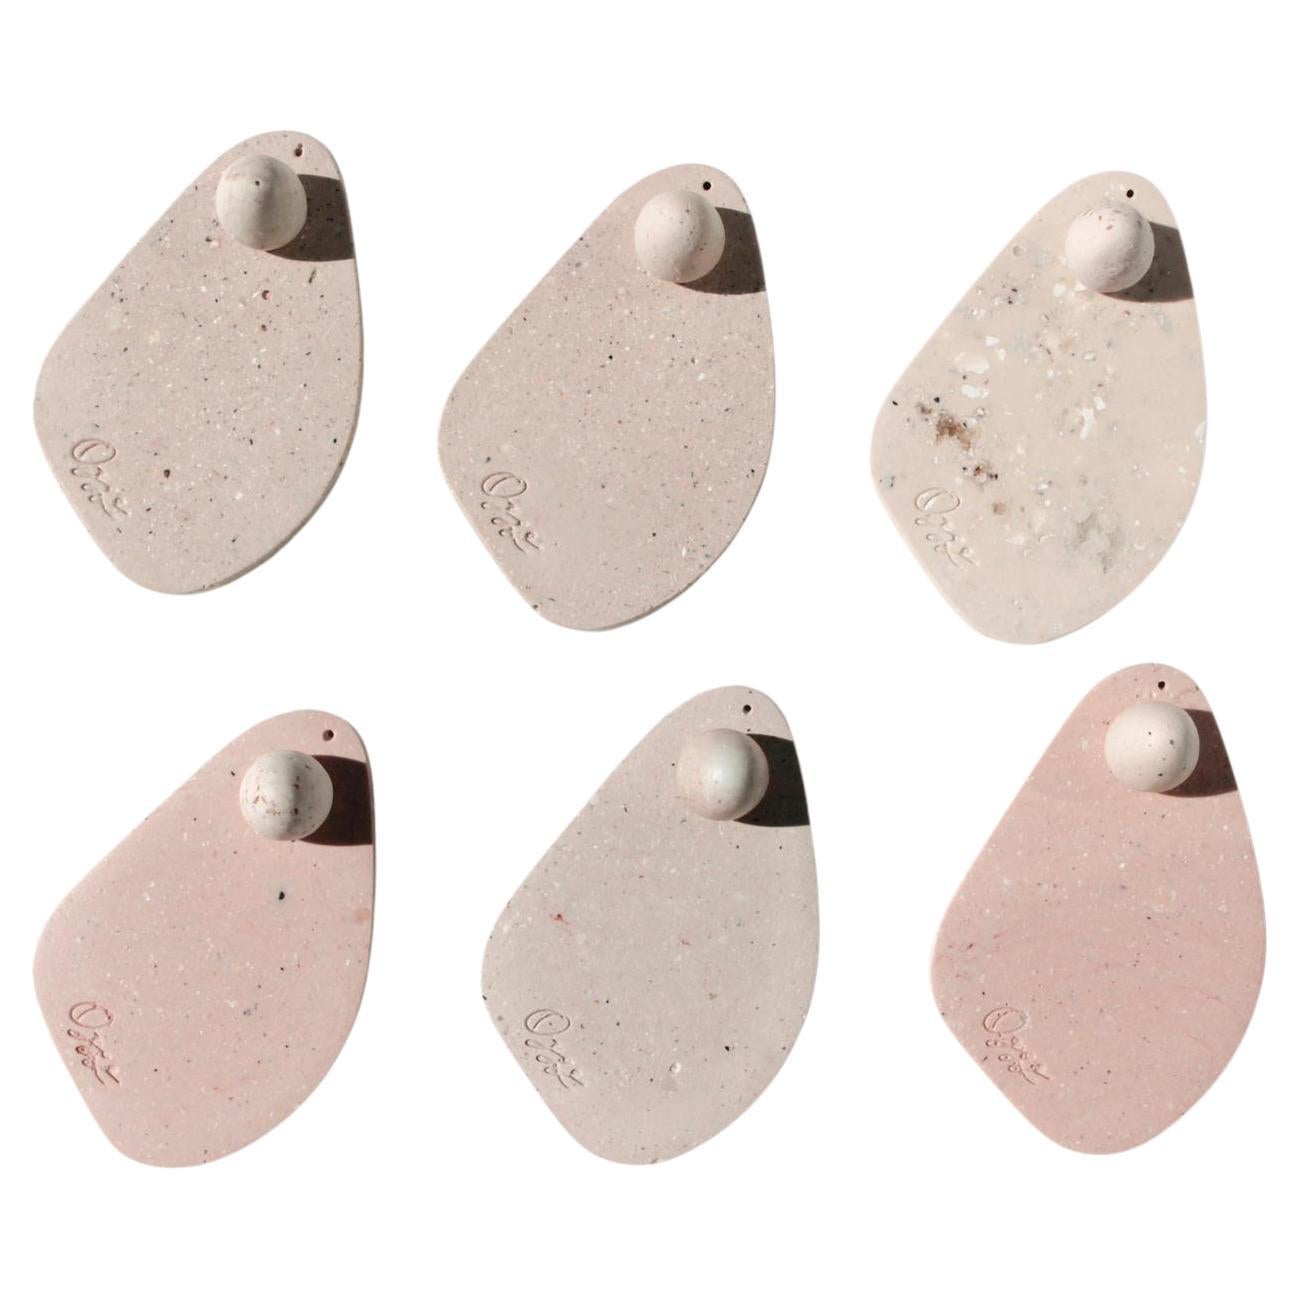 Seo of 6 Oyster shell Incenses Holder. From the Oygg series